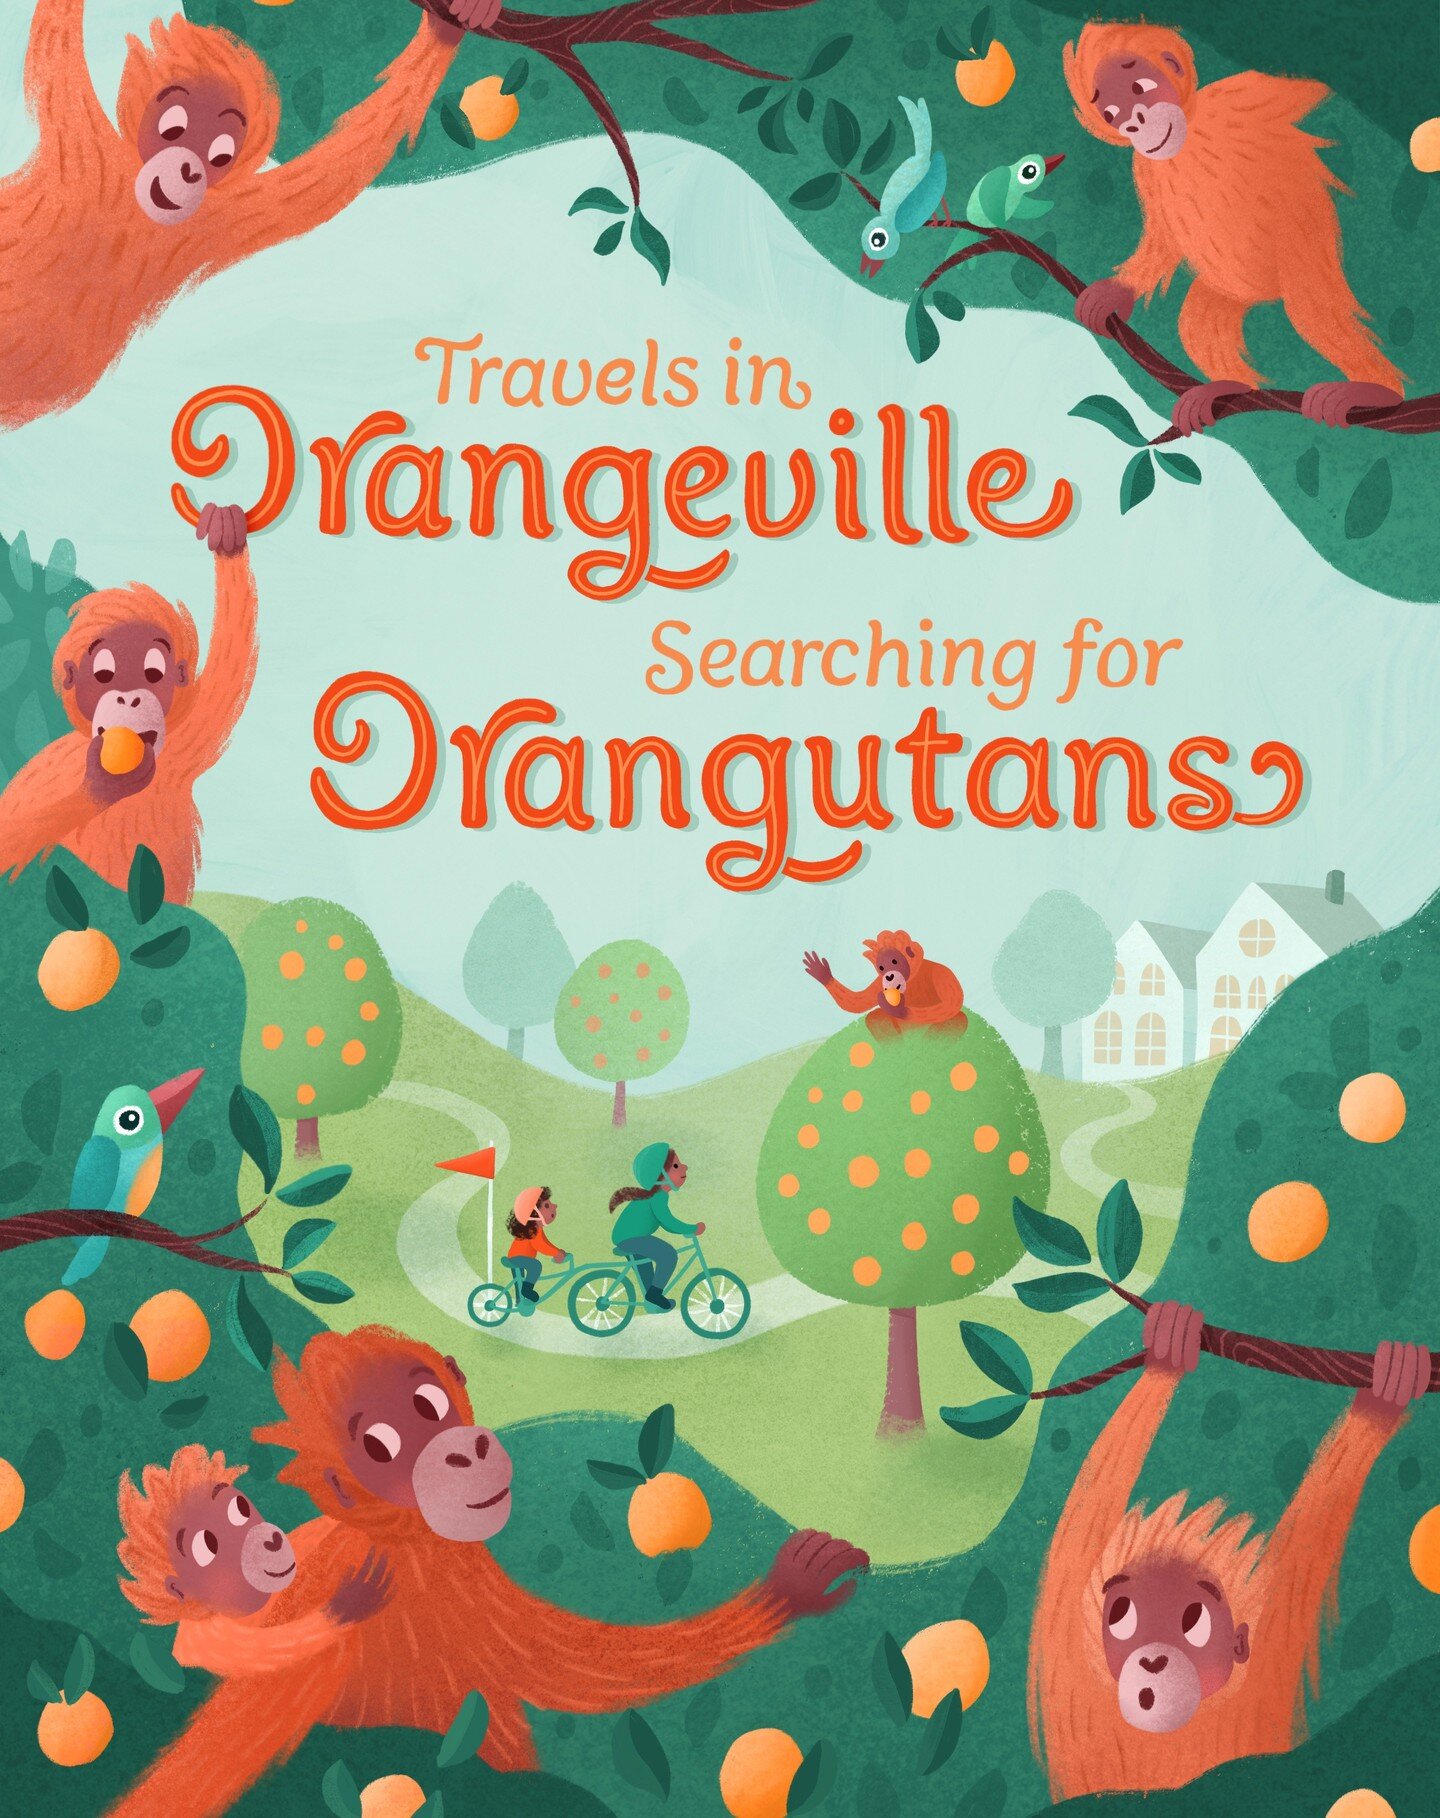 Hi! How's your week going? Here's the finished book cover design for this month's @makeartthatsells assignment. I really enjoyed this one and will be drawing more Orangutans for sure! 

#kidlitartist #kidlitillustration #bookcoverdesign #handletterin